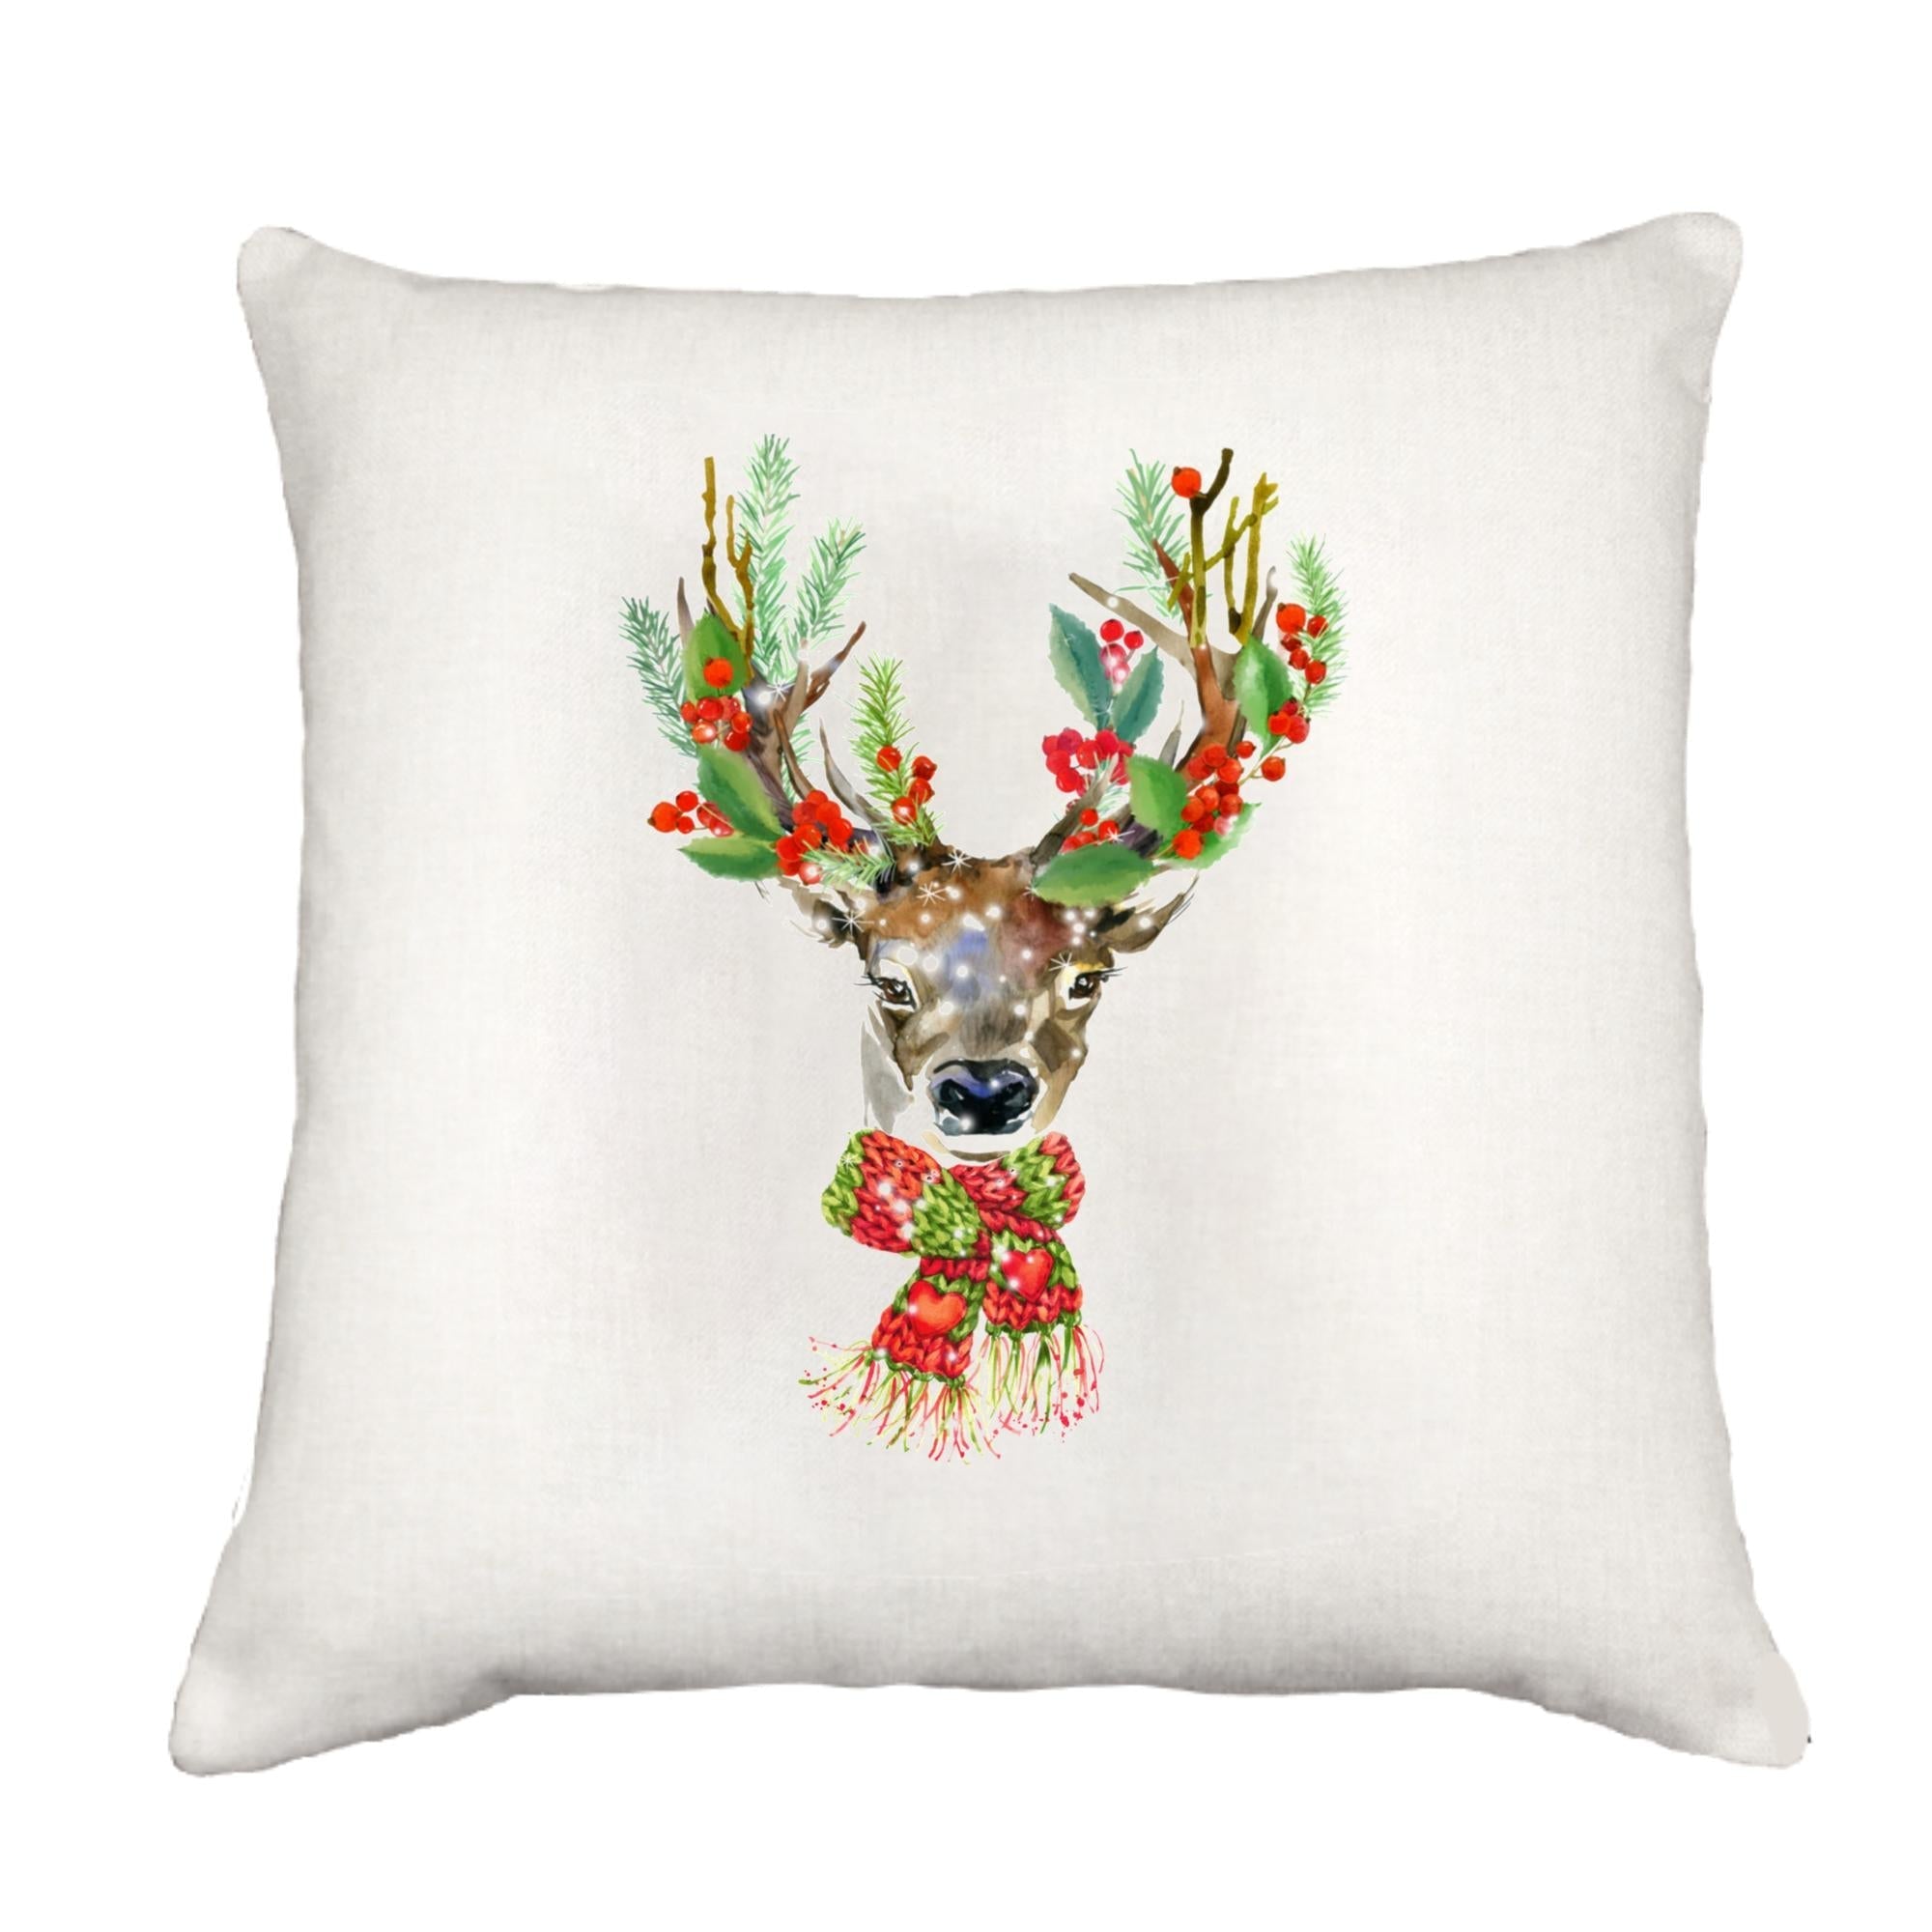 Festive Reindeer Cottage Pillow Throw/Decorative Pillow - Southern Sisters